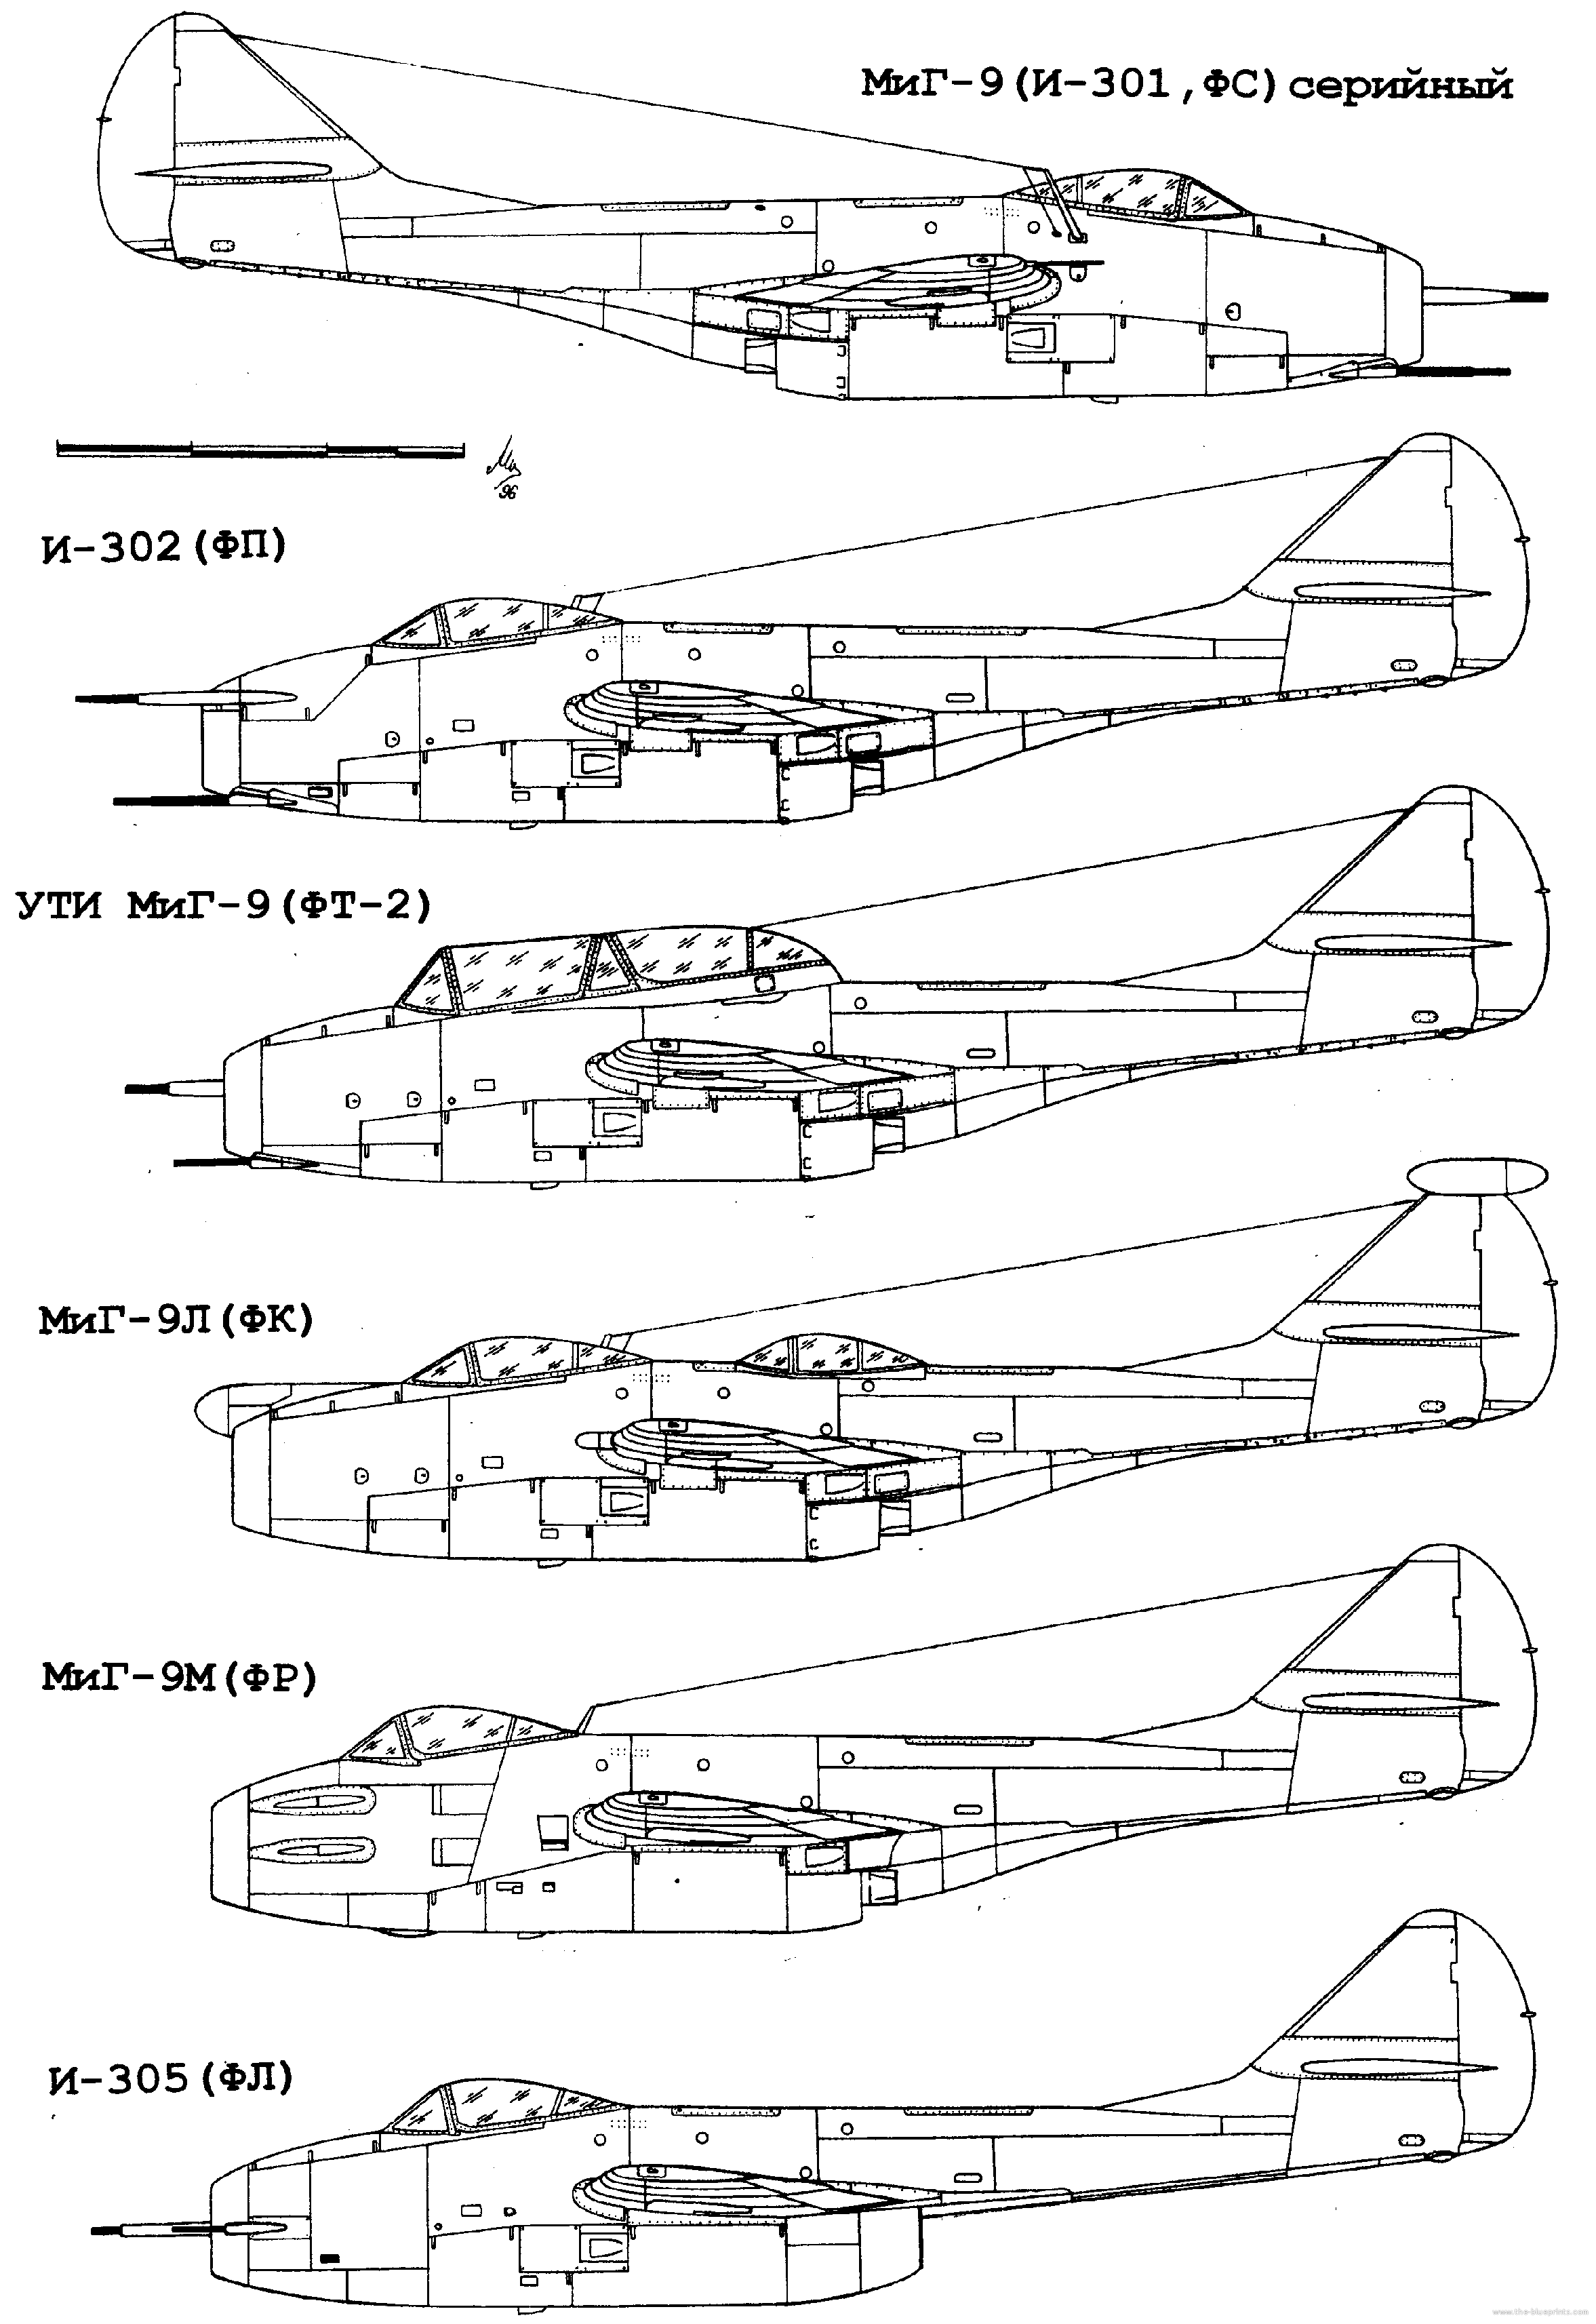 The production MiG 9 in detail